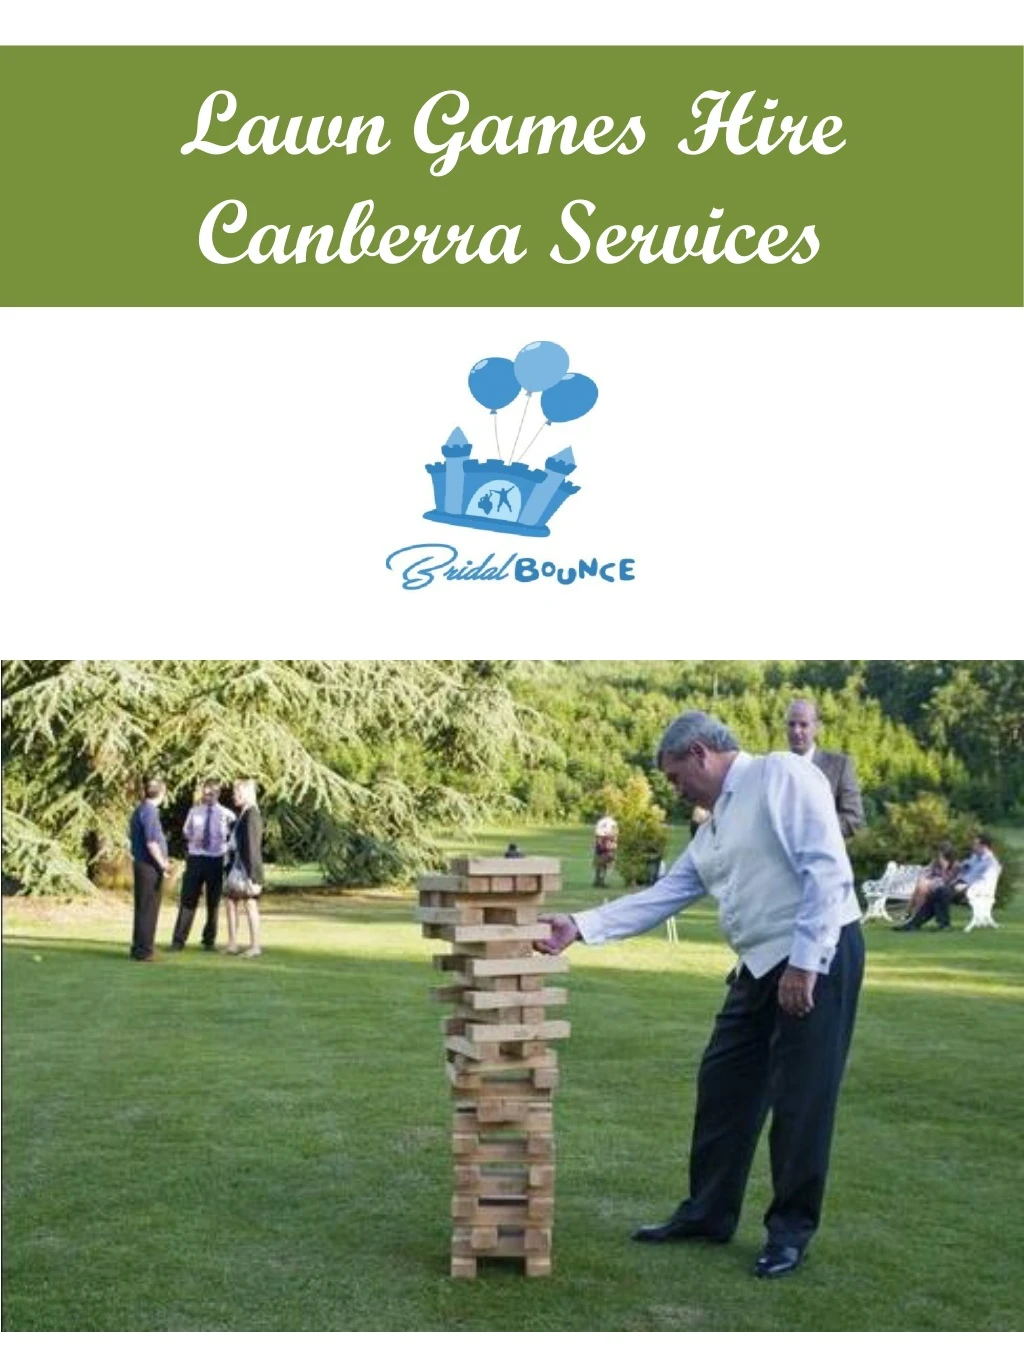 lawn games hire canberra services